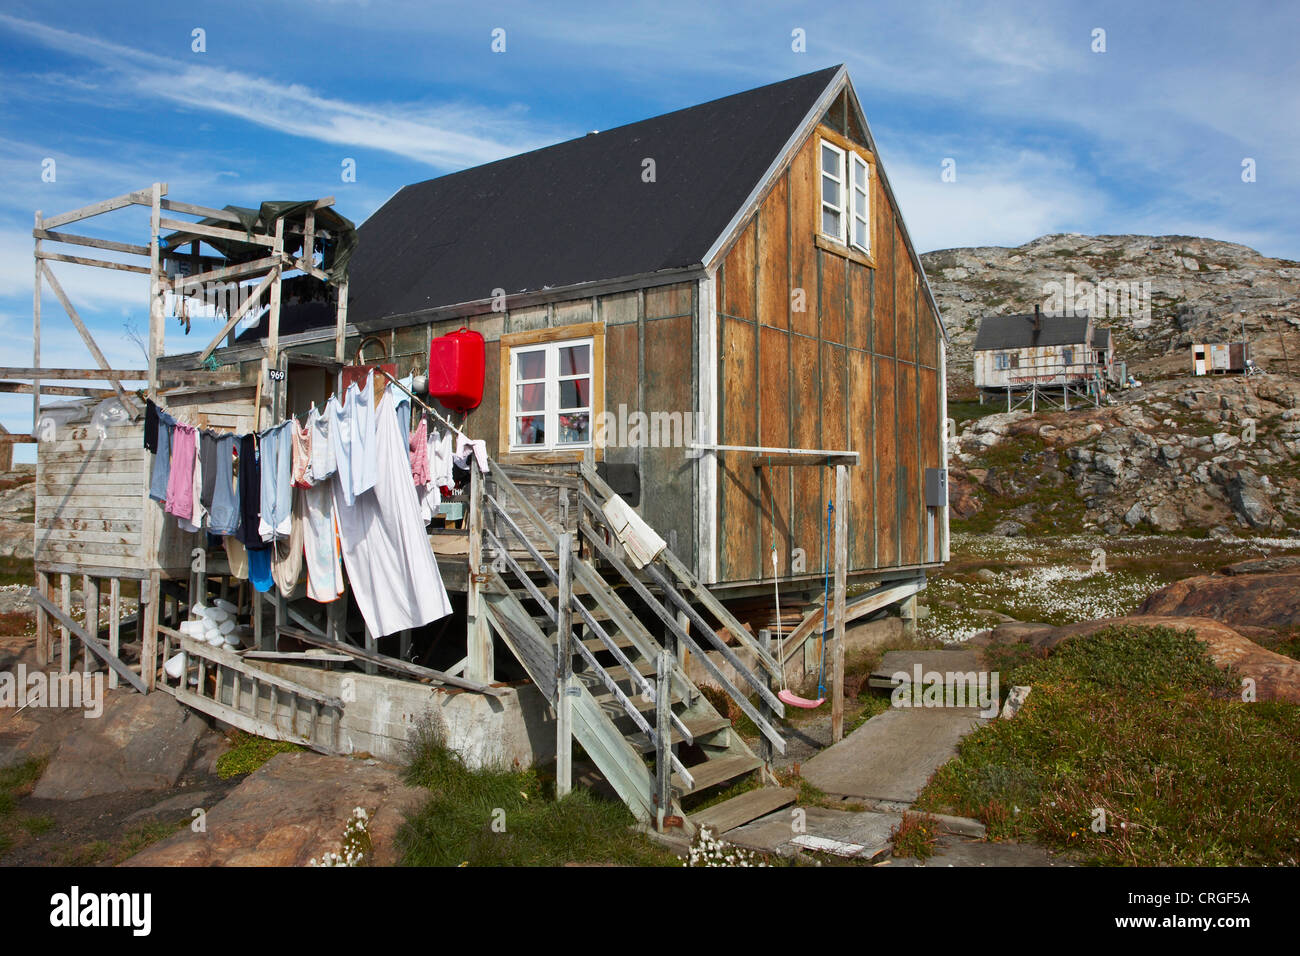 laundry drying in front of wooden house, Greenland, Ammassalik, East Greenland, Tiniteqilaq Stock Photo